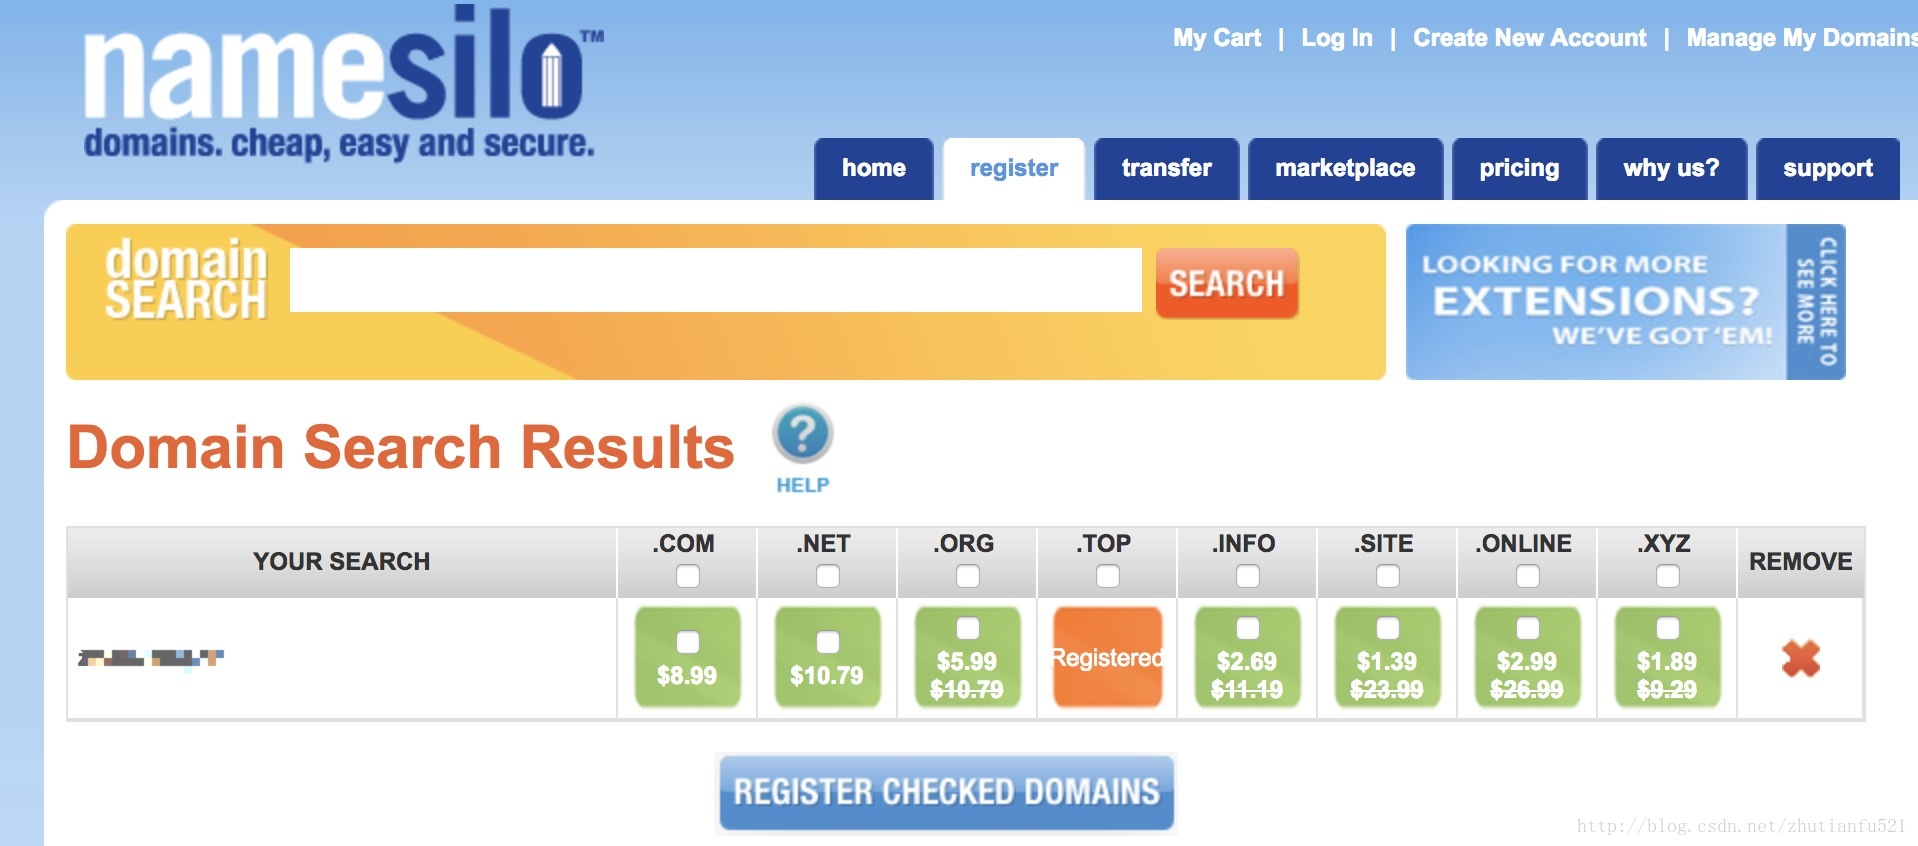 T me cheap accounts. Search domain пример. NAMESILO. Registration search. Extension of domains to all r^2.